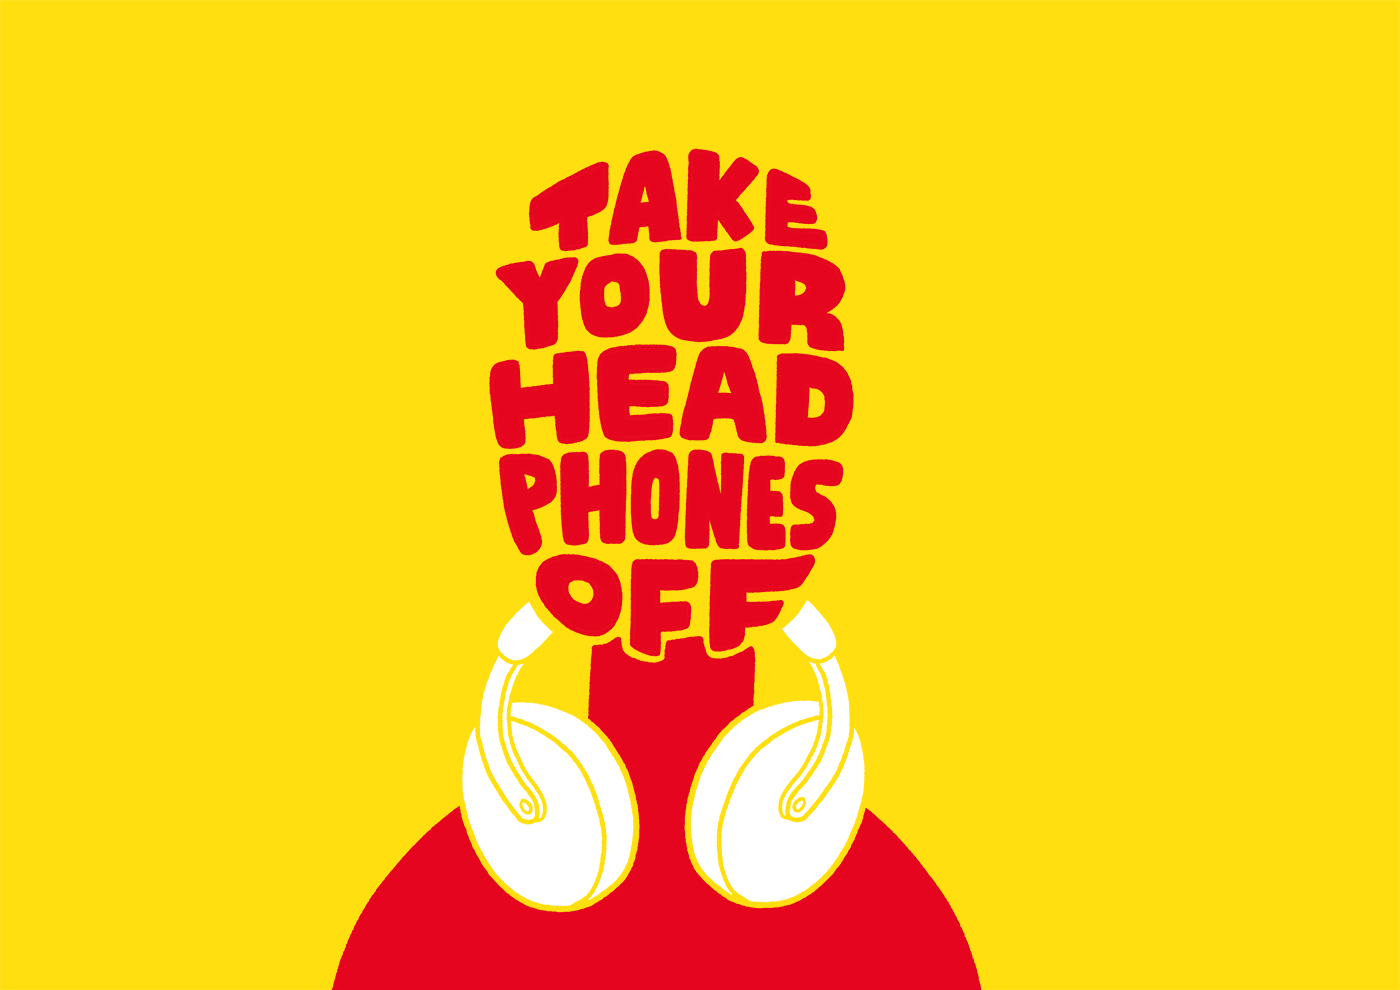 Take your headphones off